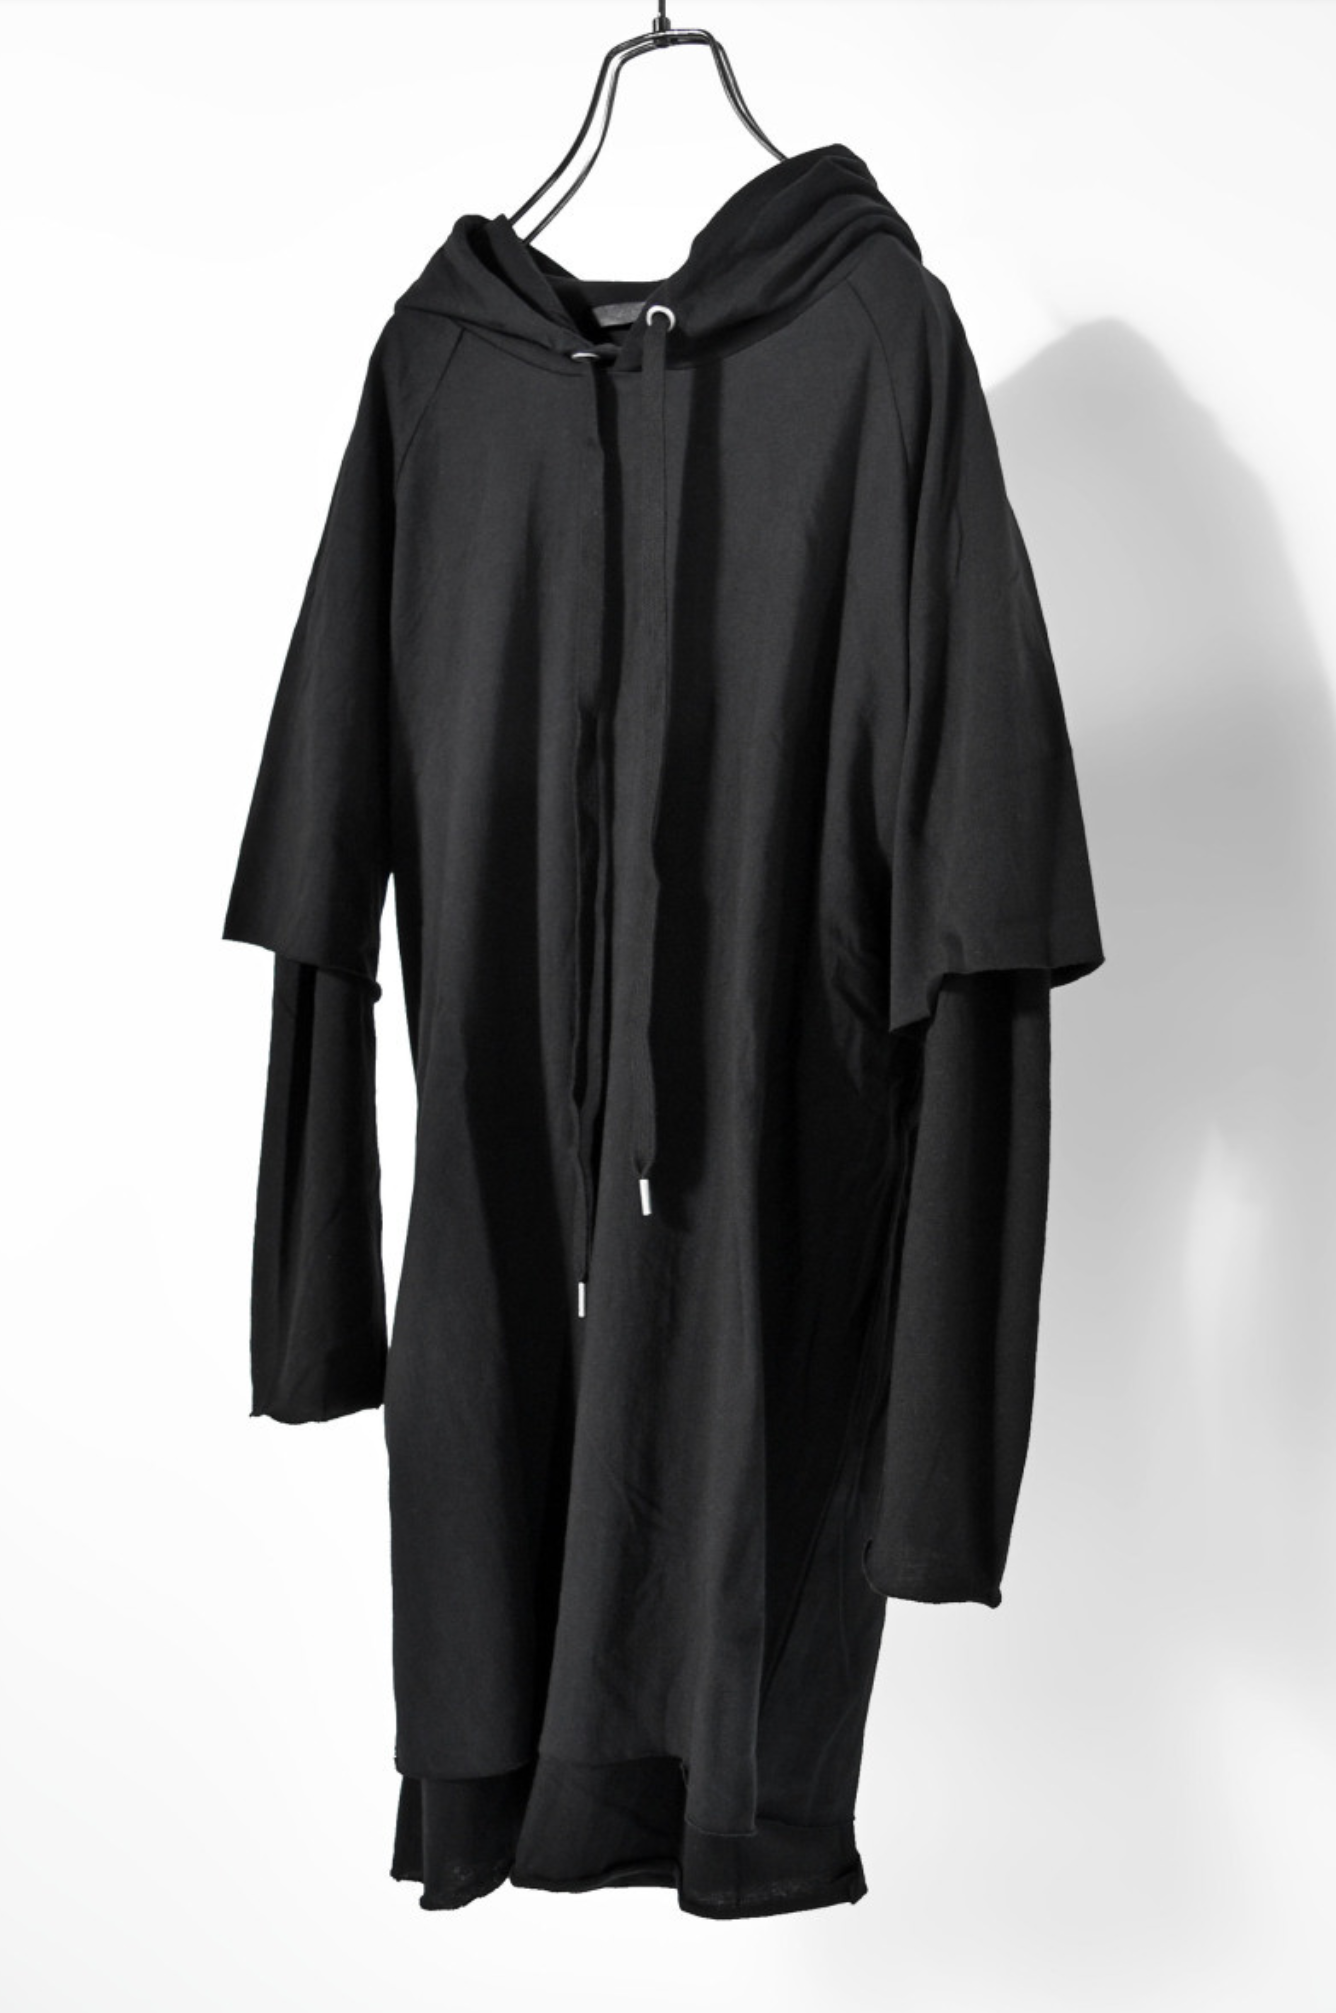 Oversized Hoodie With Double Sleeve In Charcoal Marl